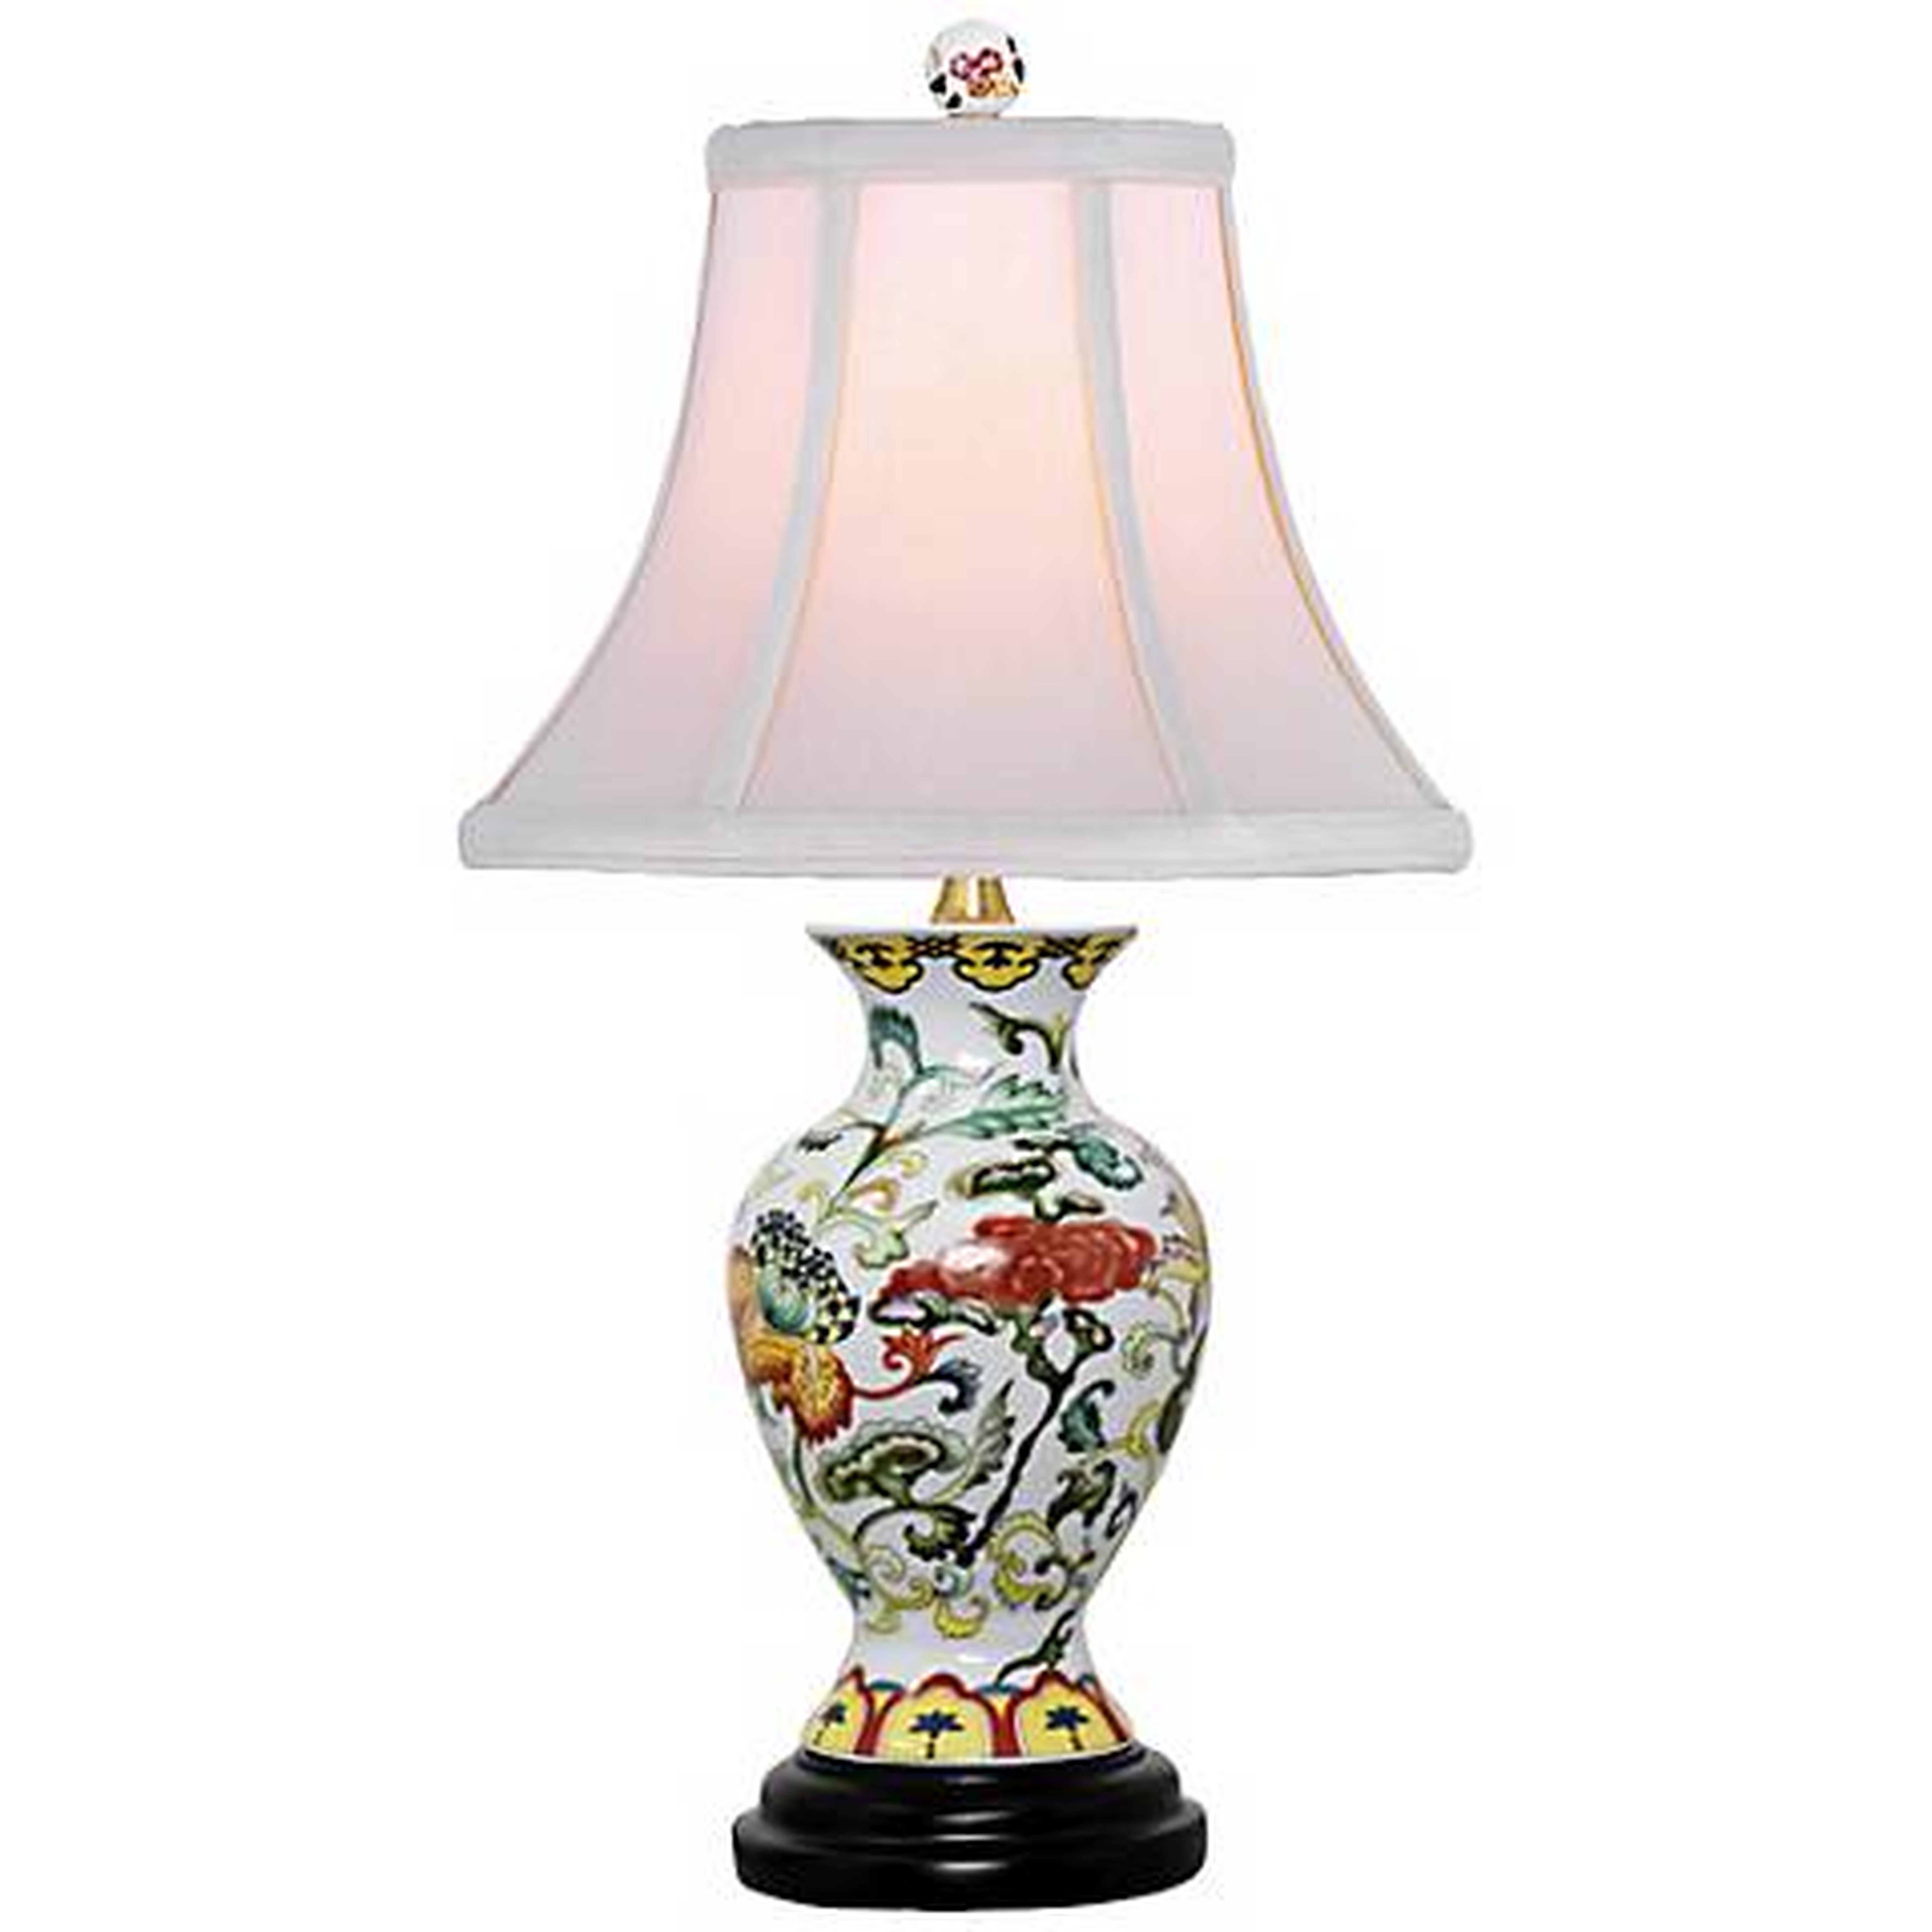 Scrolled Floral Urn 17 1/2" High Porcelain Accent Table Lamp - Lamps Plus